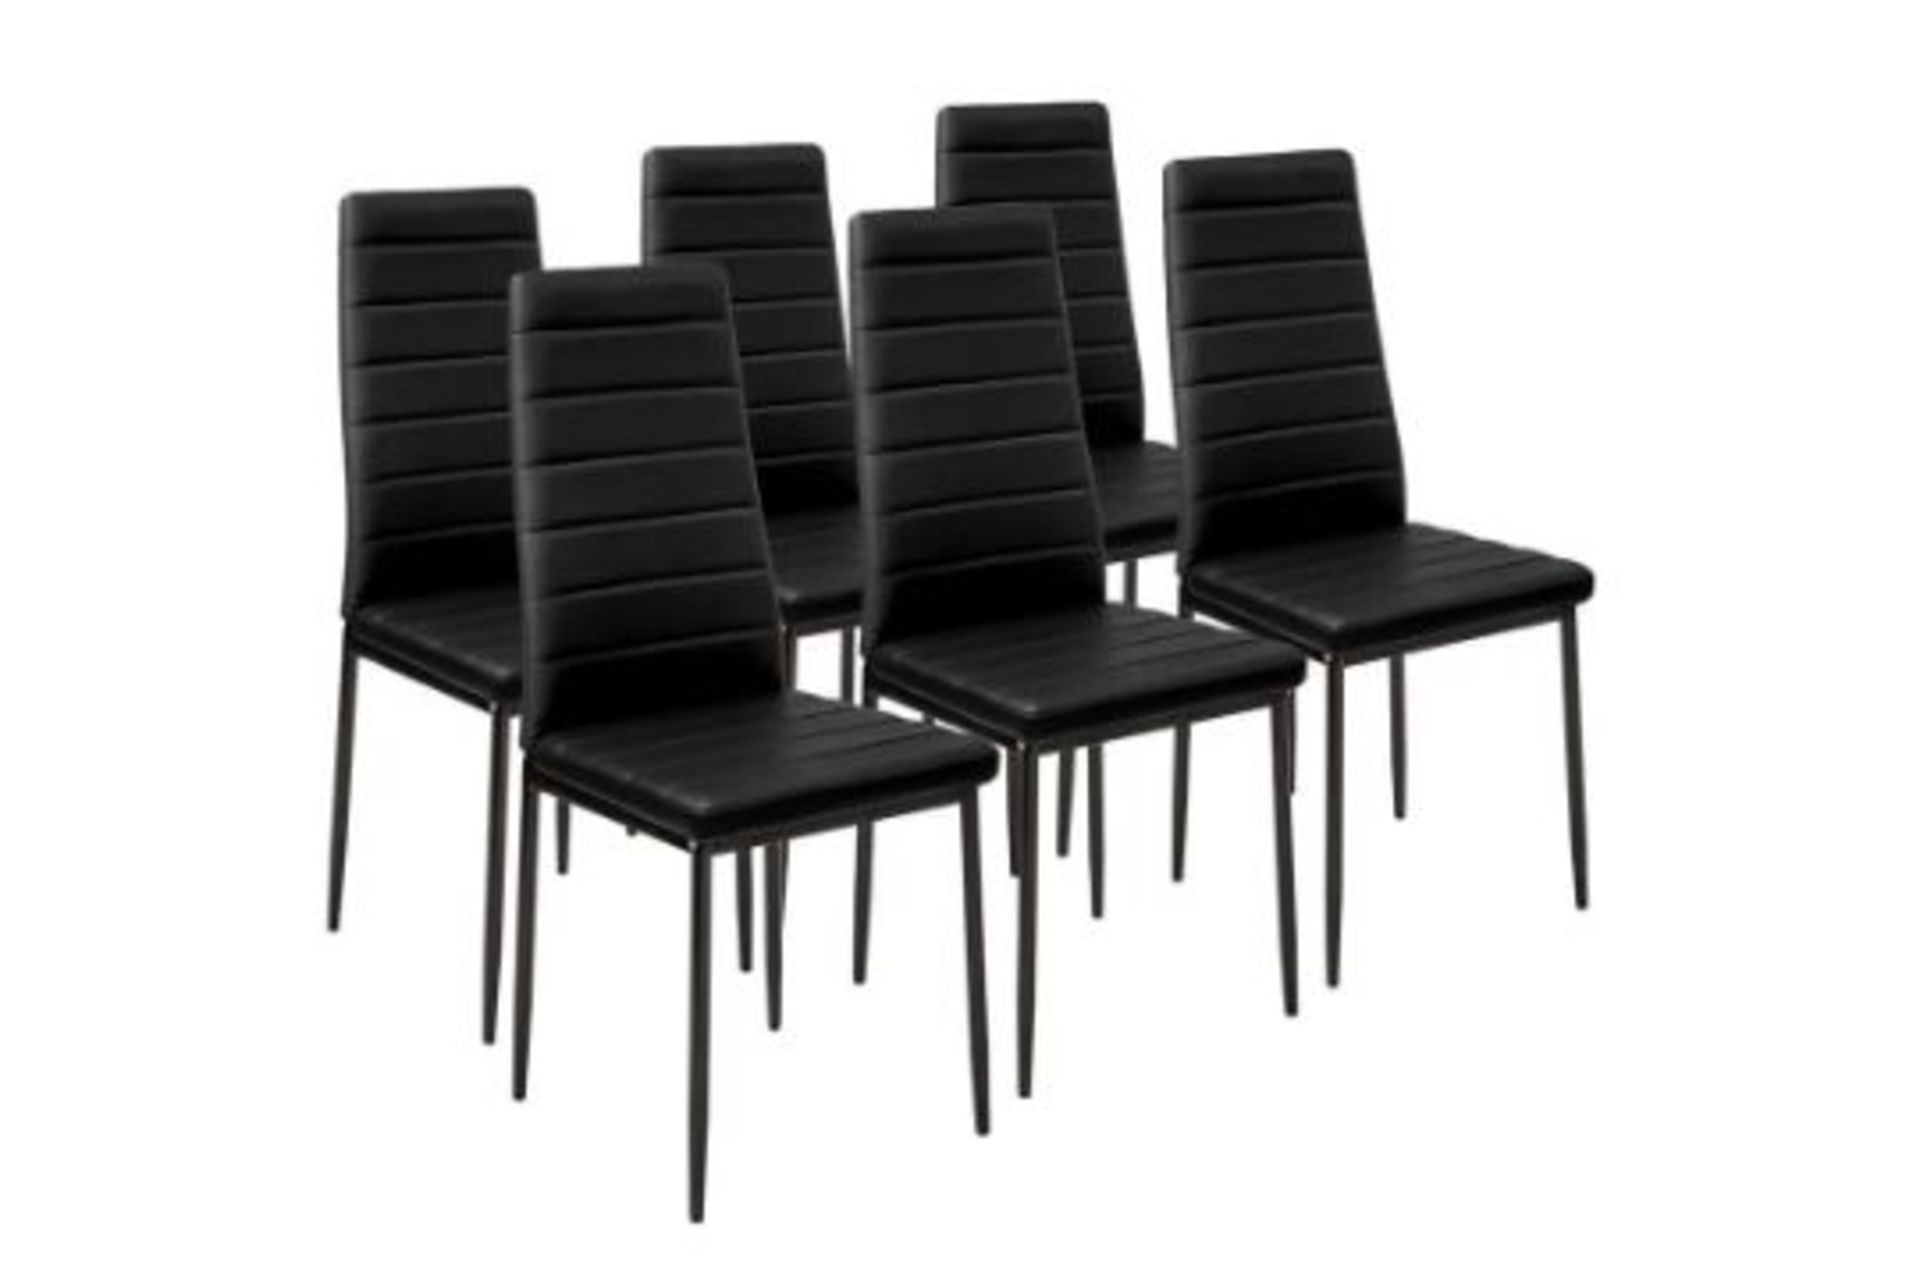 6 dining chairs synthetic leather black. - R13A.8.. RRP £239.99. These beautiful, elegant dining